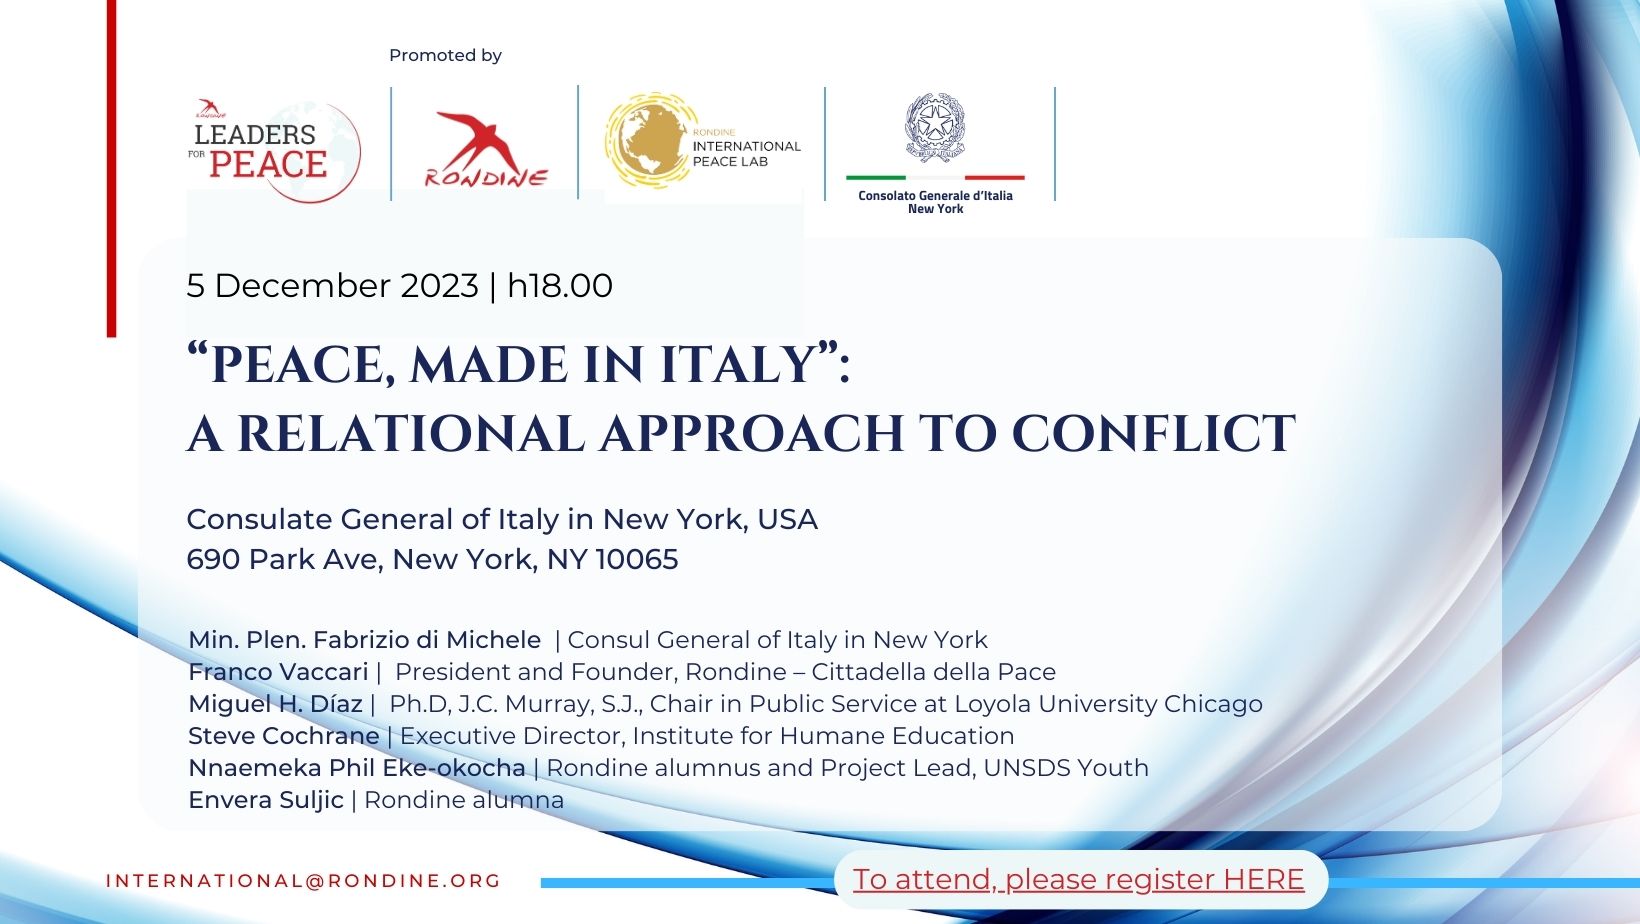 The Consulate General of Italy in New York host the event: “Peace, Made in italy”